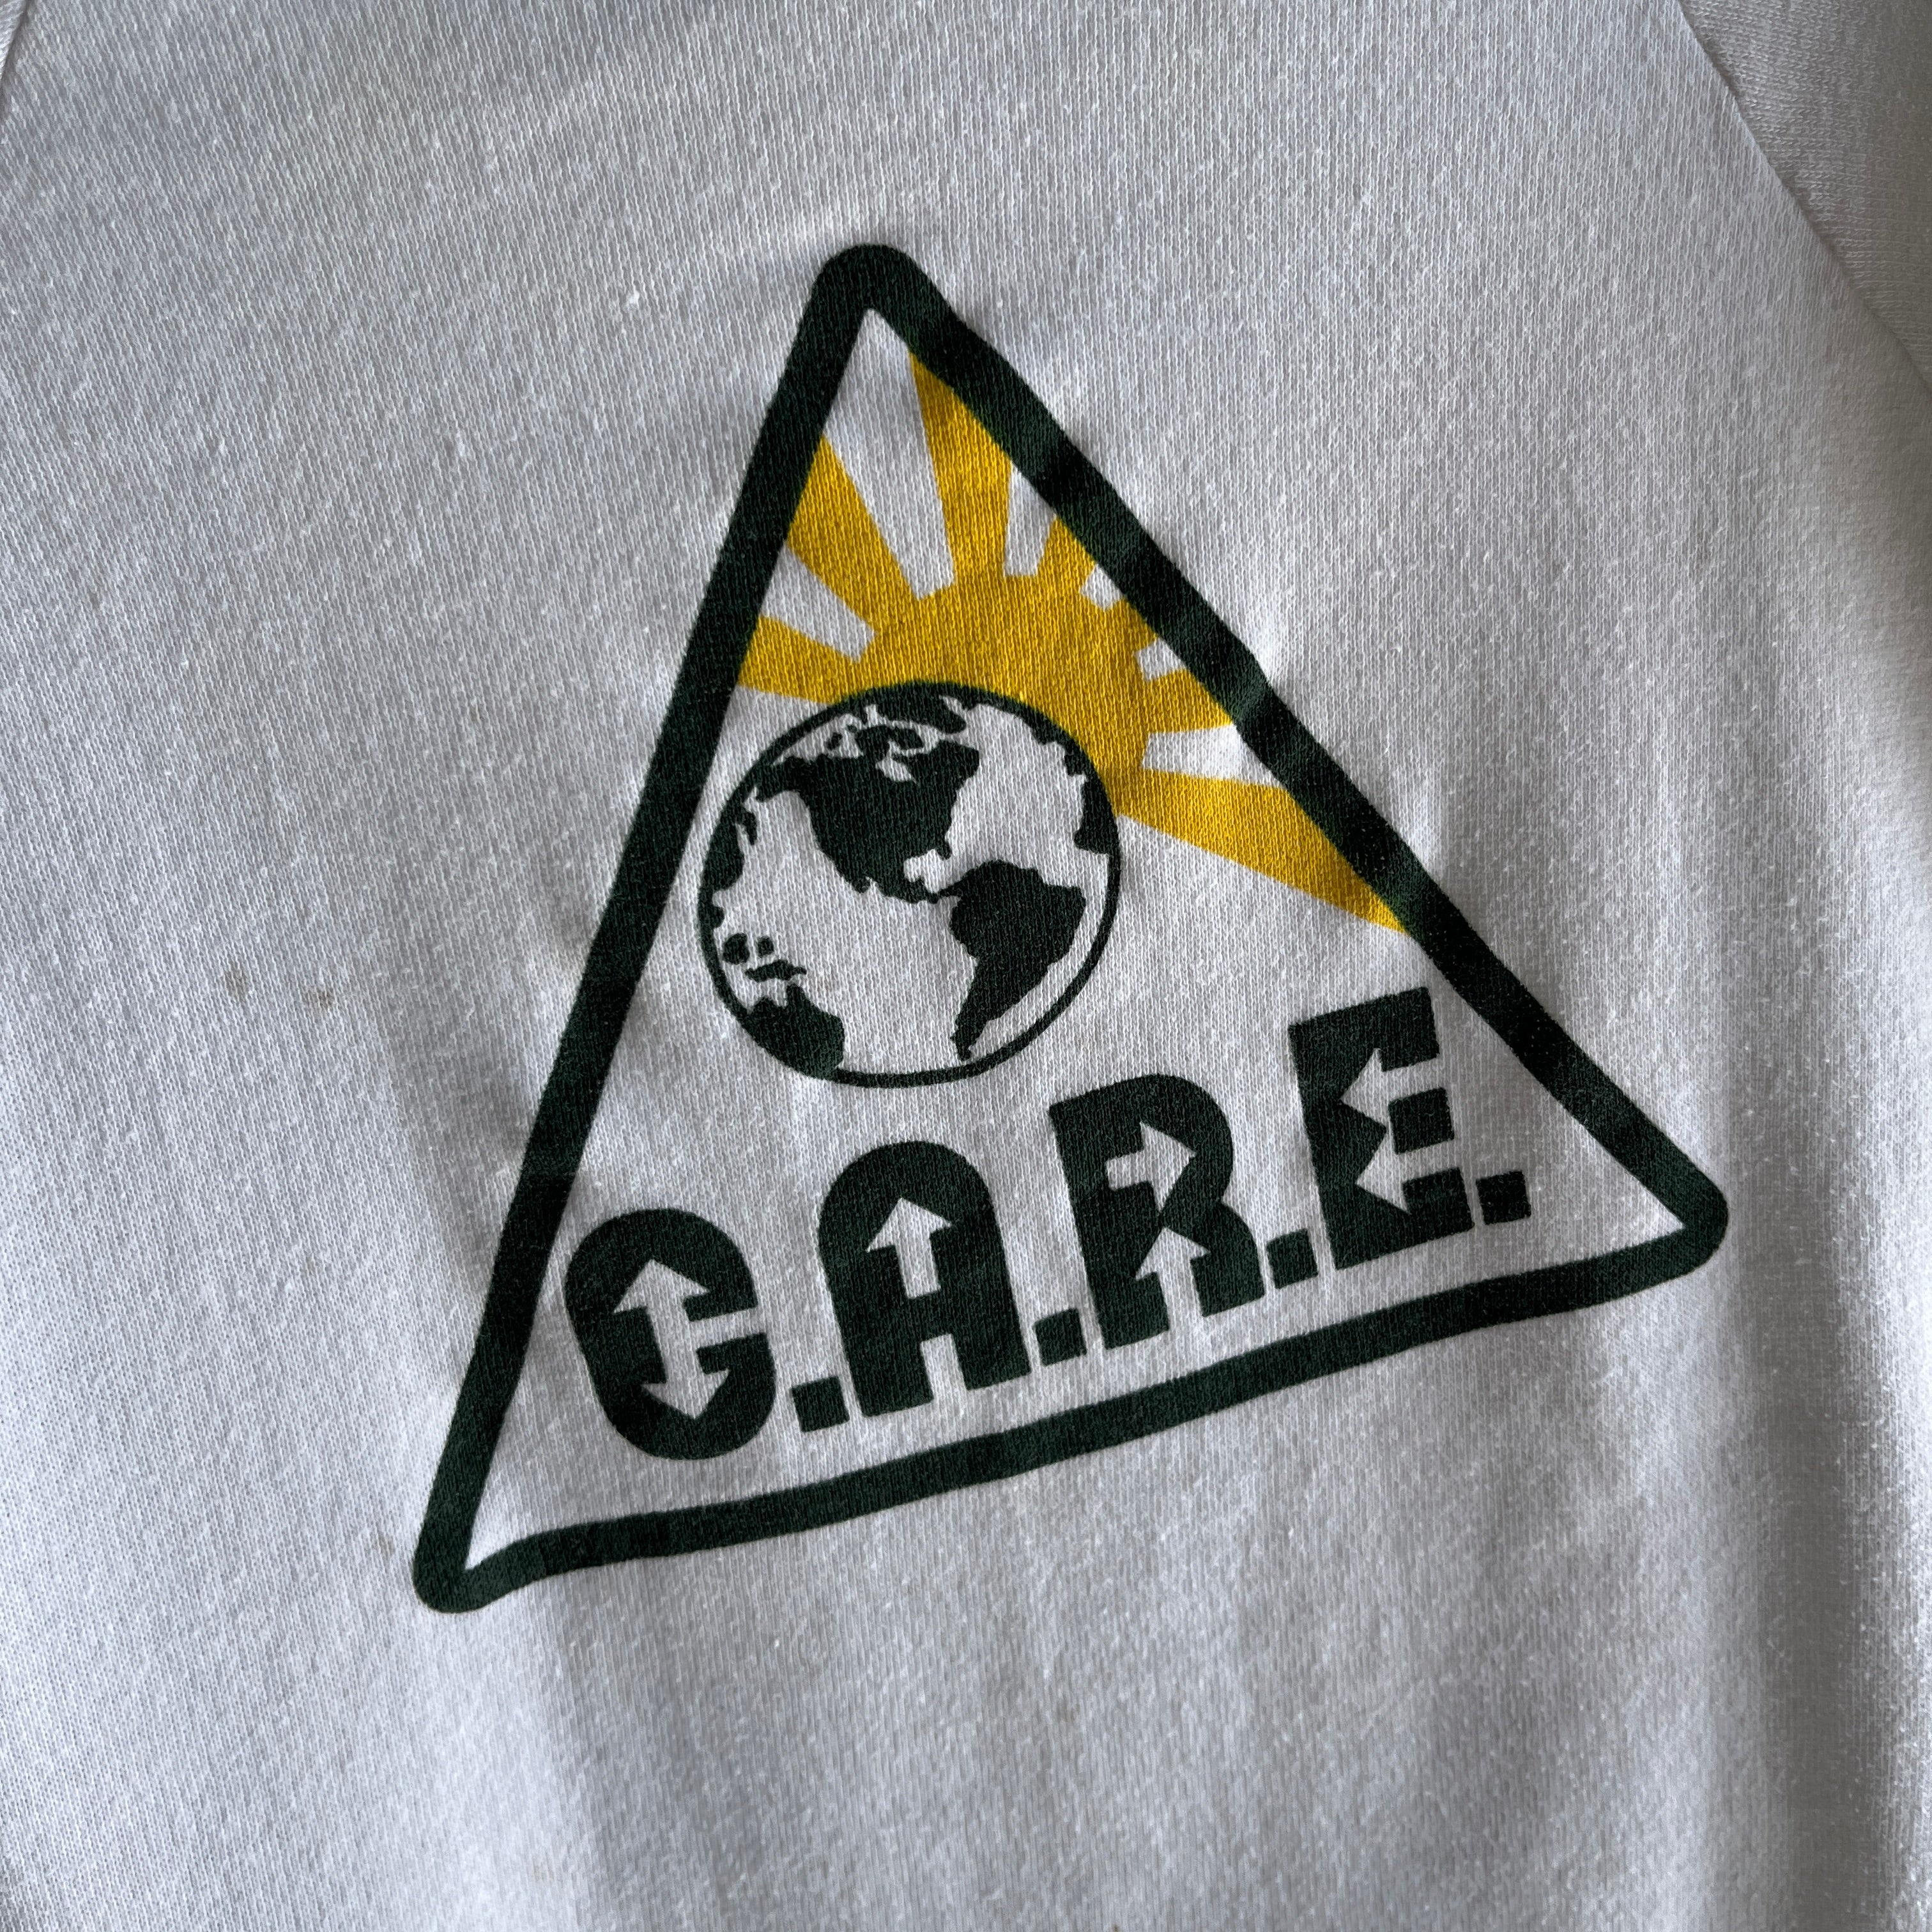 1980s C.A.R.E. Nicely Stained Sweatshirt by Healthknit